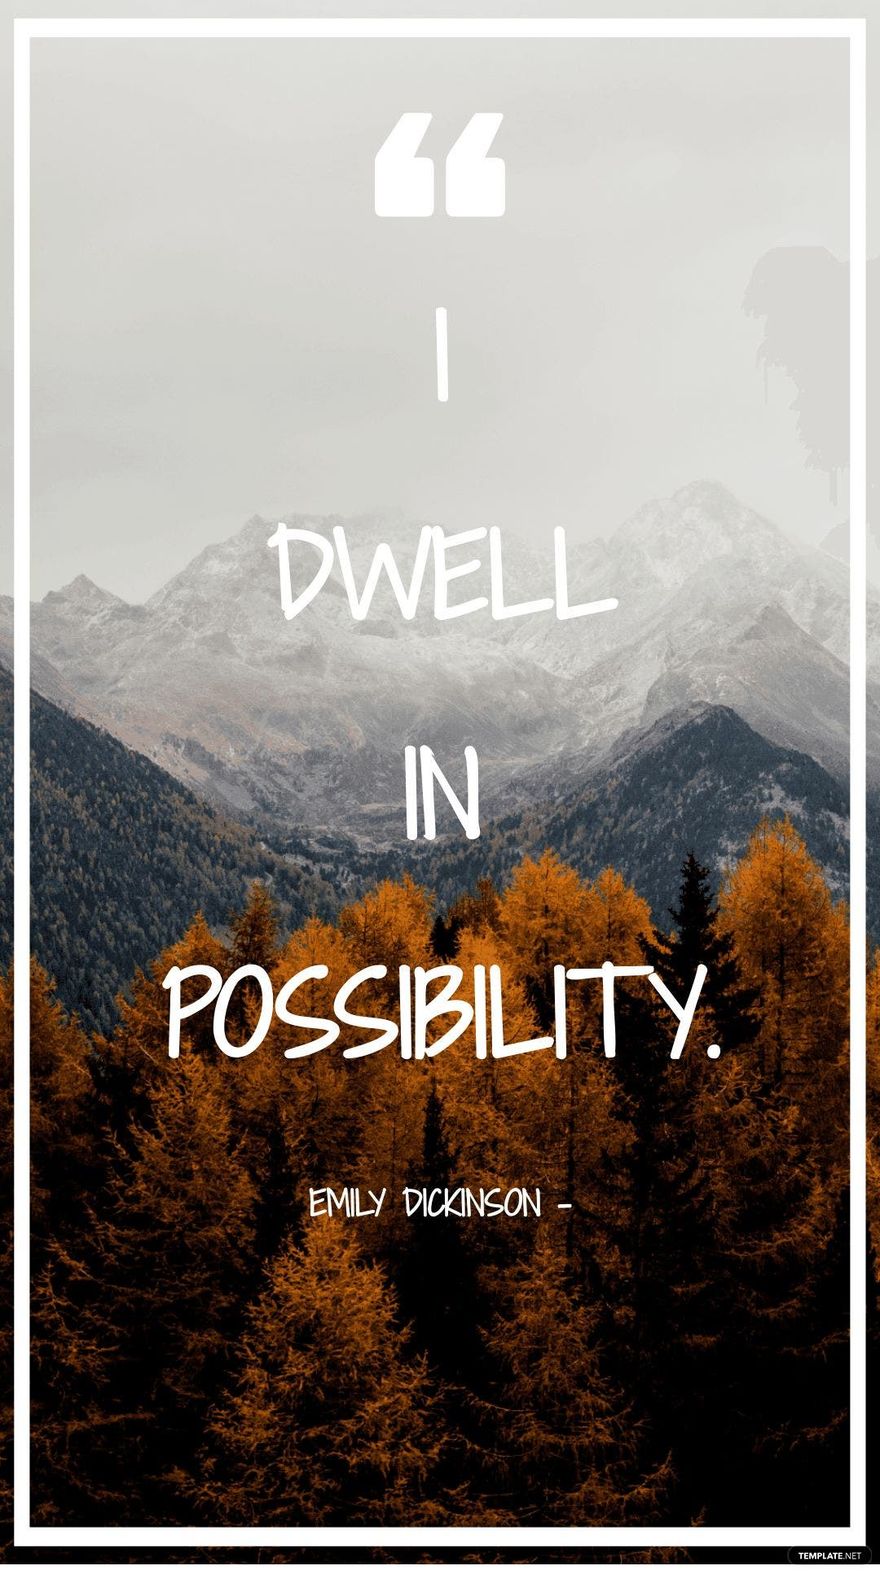 Emily Dickinson - I dwell in possibility.